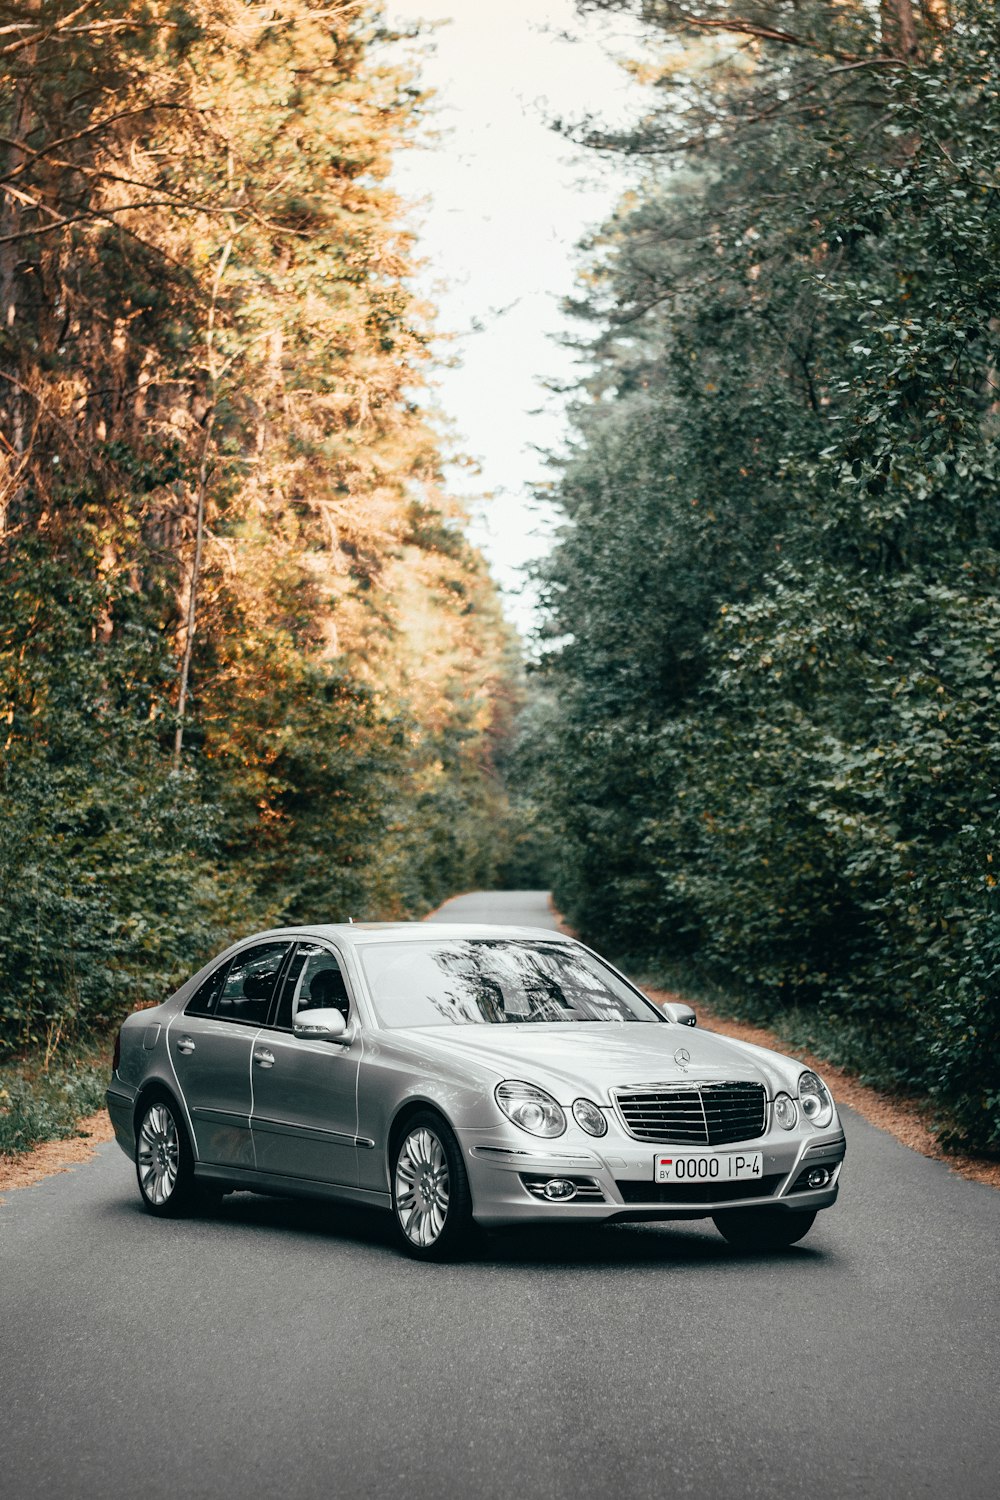 Mercedes E Class Pictures | Download Free Images on Unsplash